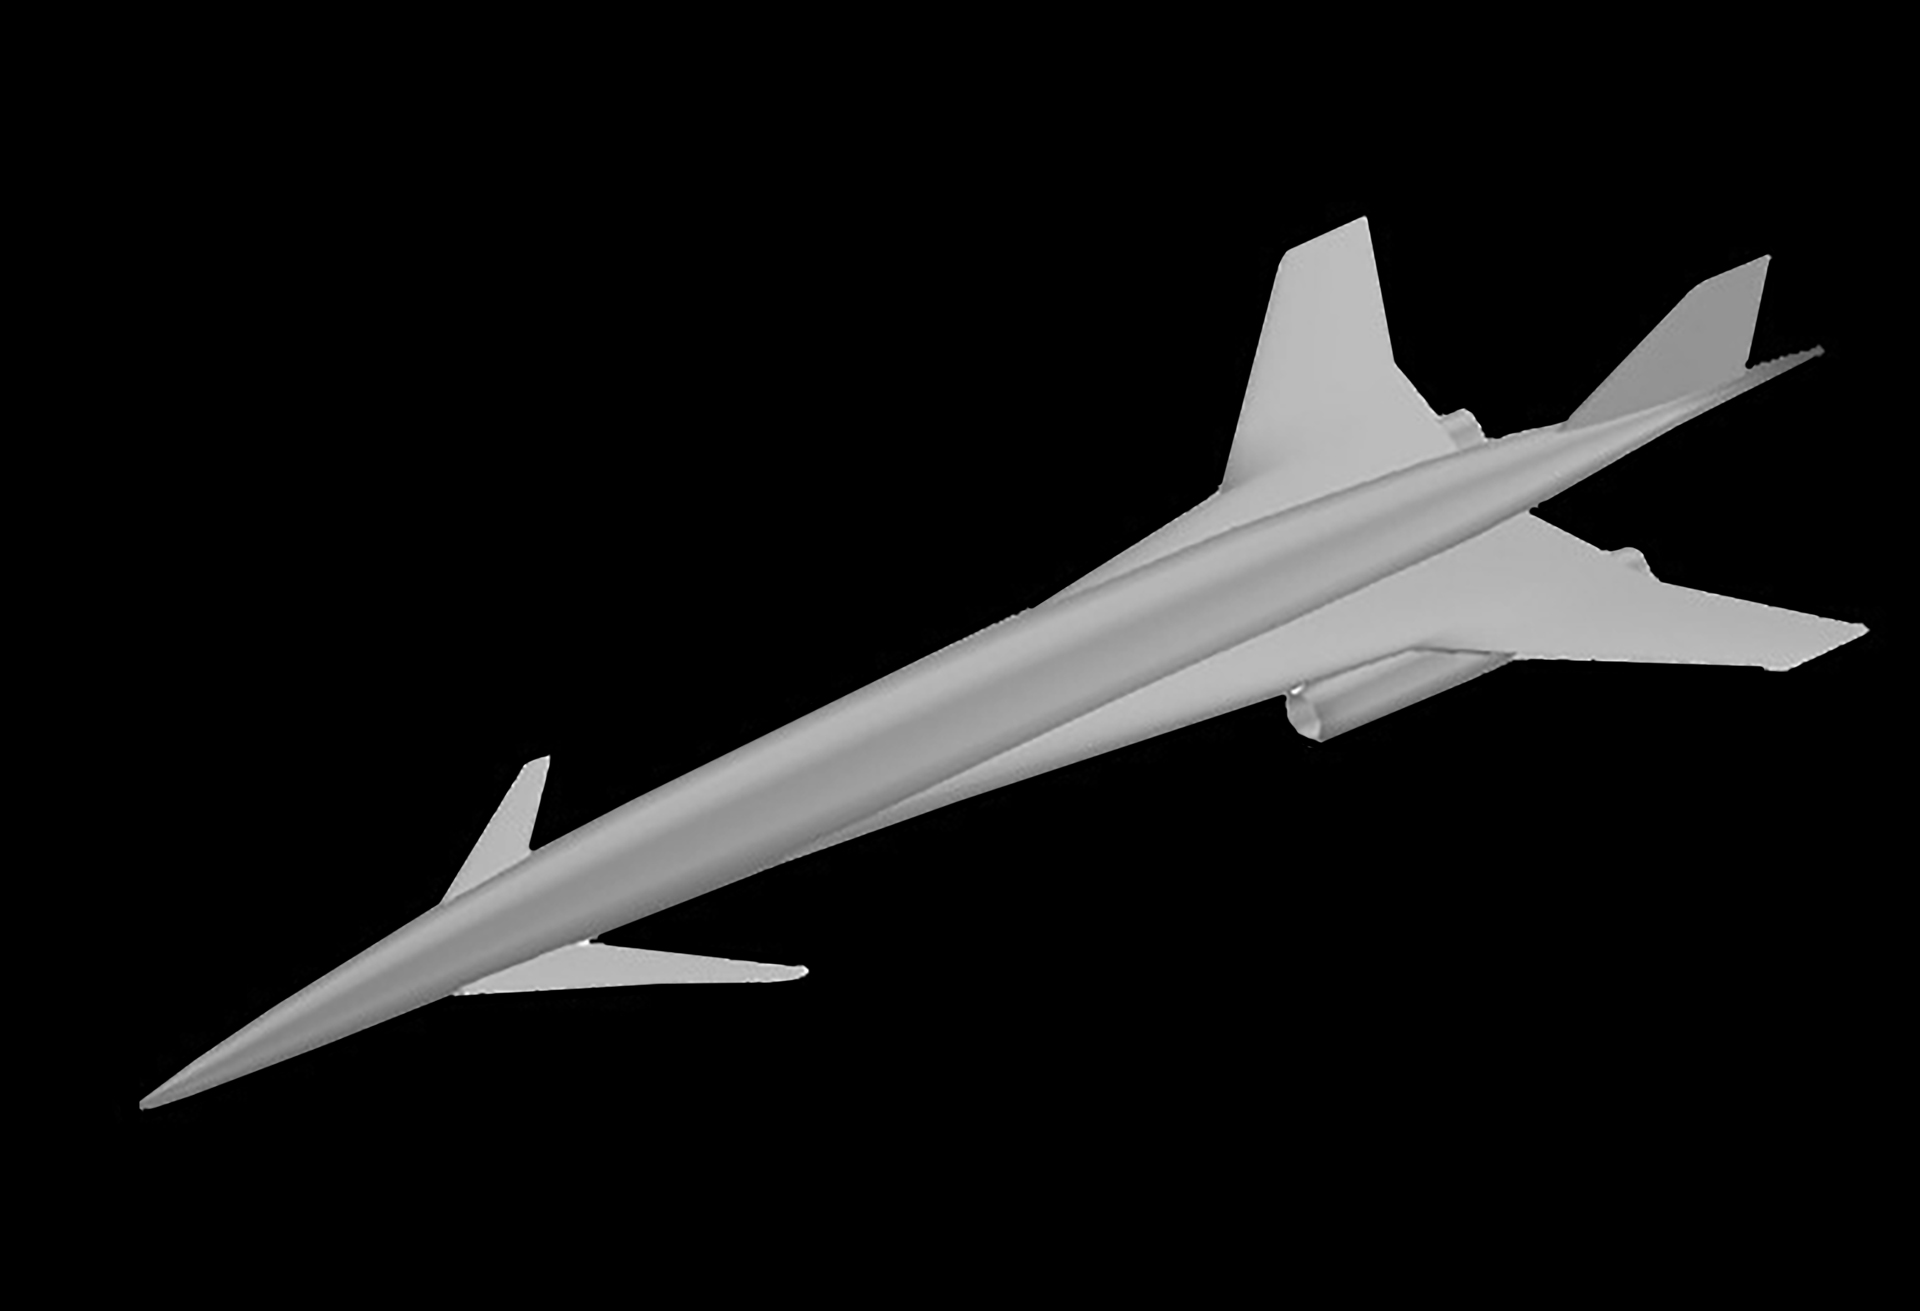 Artist illustration of the Pagan aircraft on a black background.